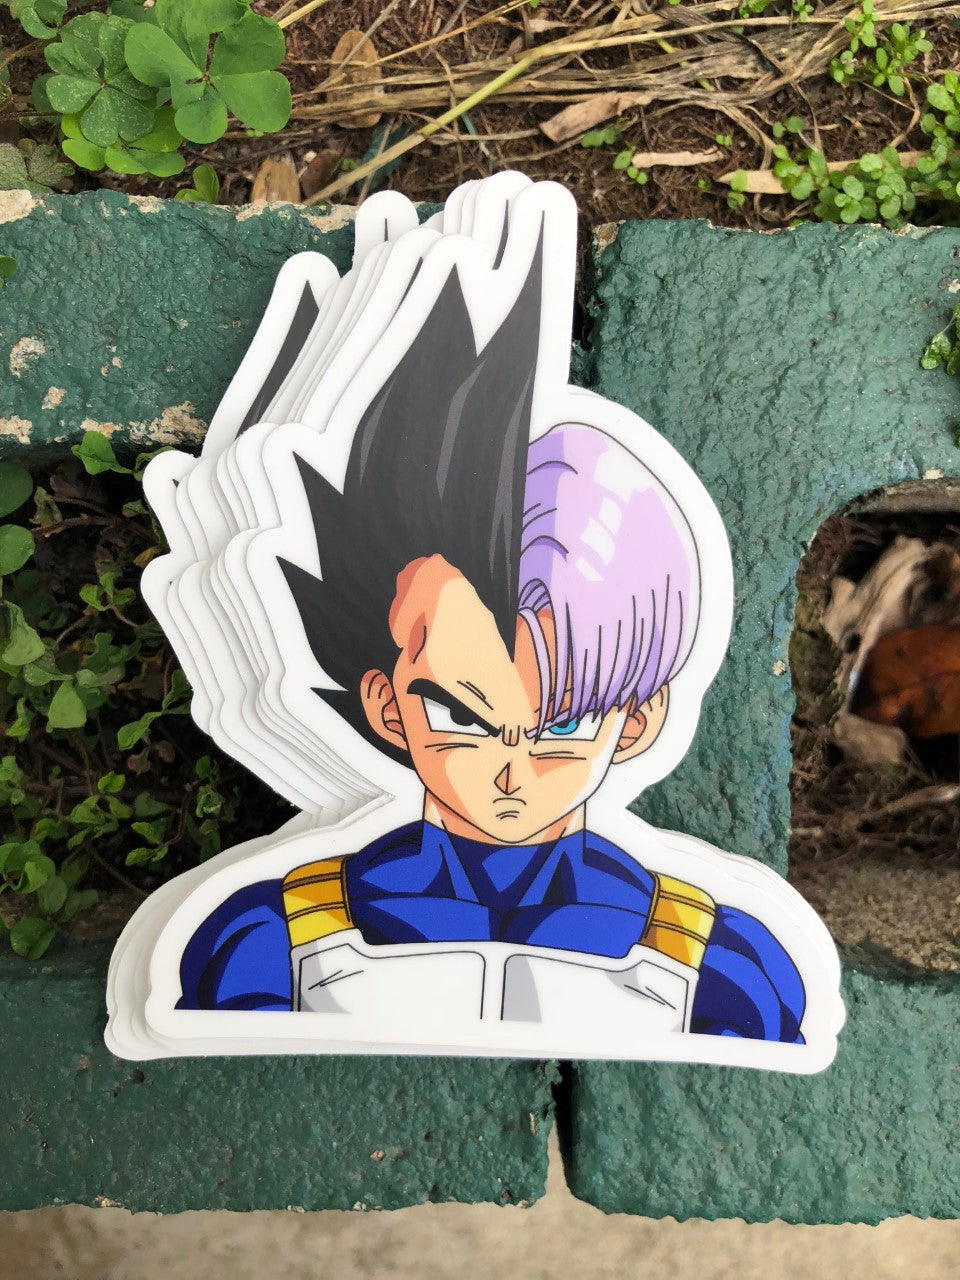 1 Anime Mashup Trunks Sticker– One 4 Inch Water Proof Vinyl Sticker – For Hydro Flask, Skateboard, Laptop, Planner, Car, Collecting, Gifting